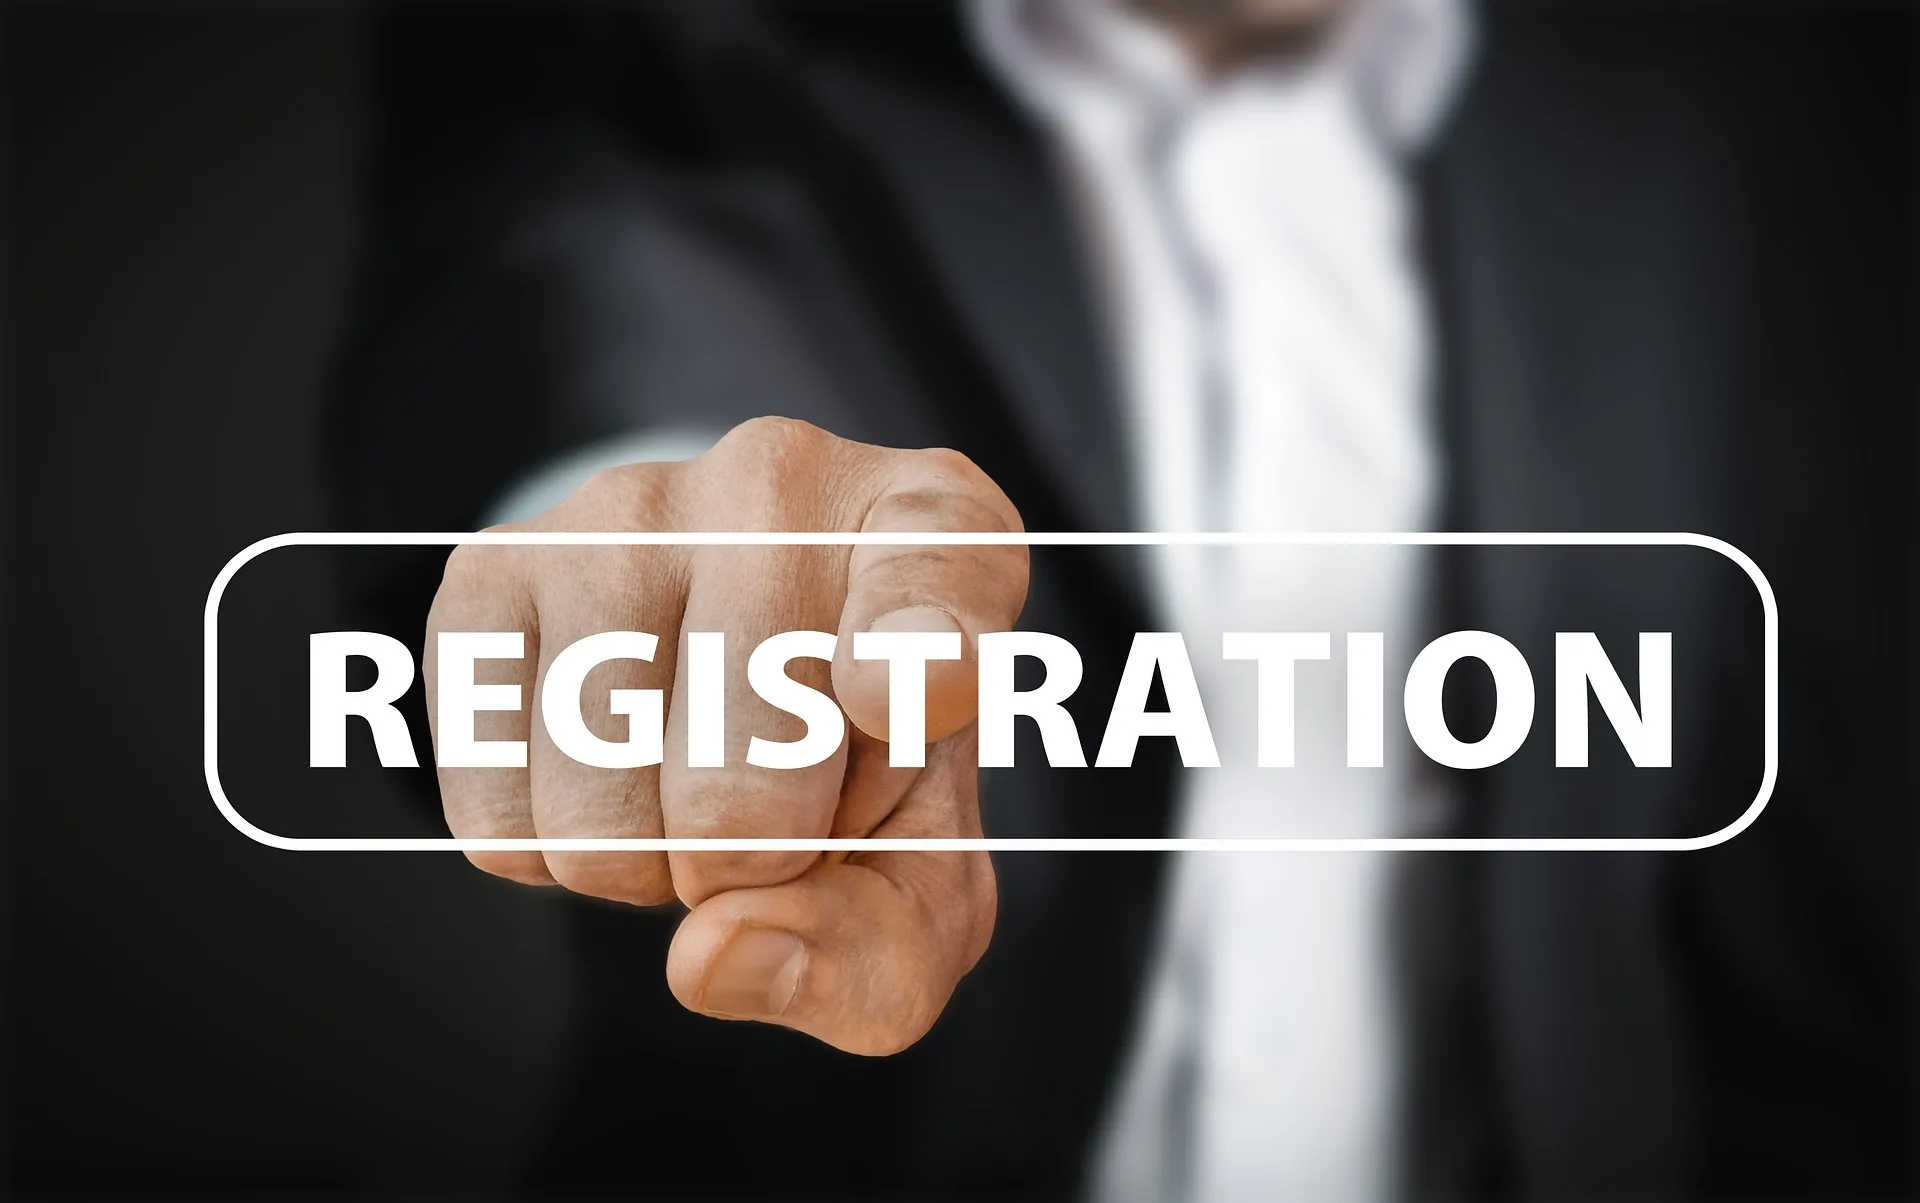 A man in suit pointing his finger in front and a written text of "Registration".